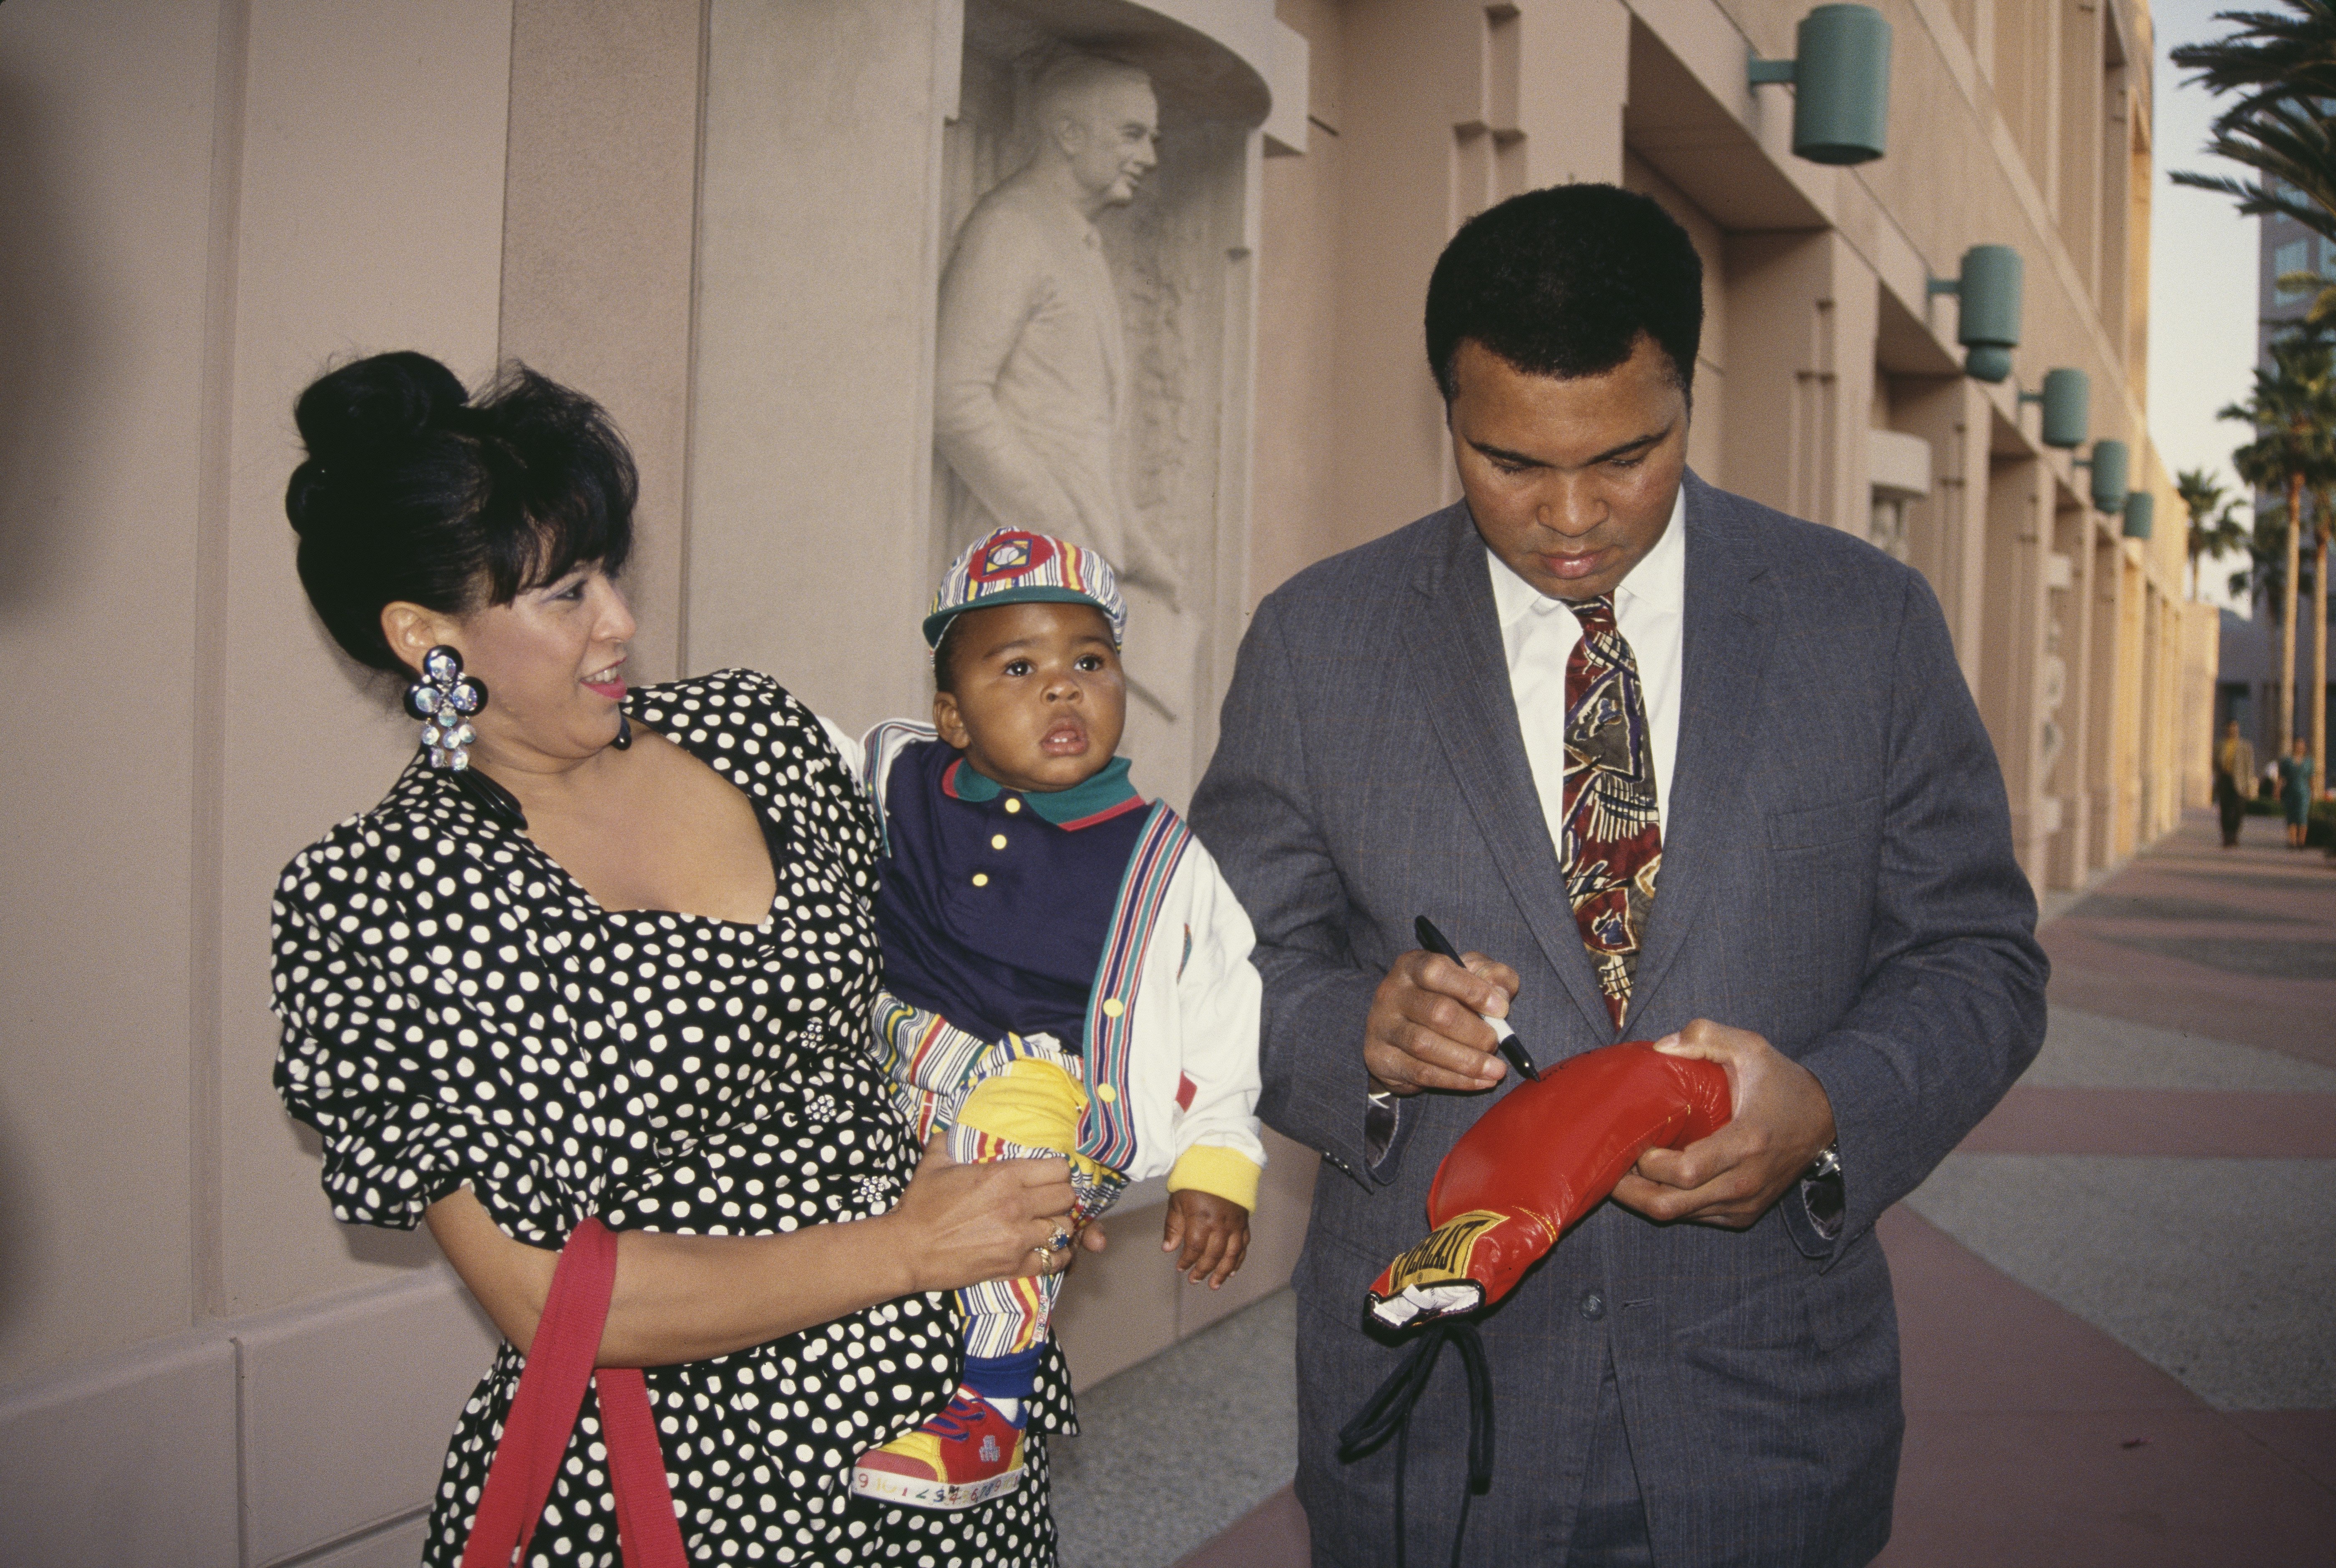 Yolanda "Lonnie" Ali holding her adopted son, Asaad Ali, as husband, American heavyweight boxer Muhammad Ali autographs a boxing glove, circa 1986. | Source: Getty Images